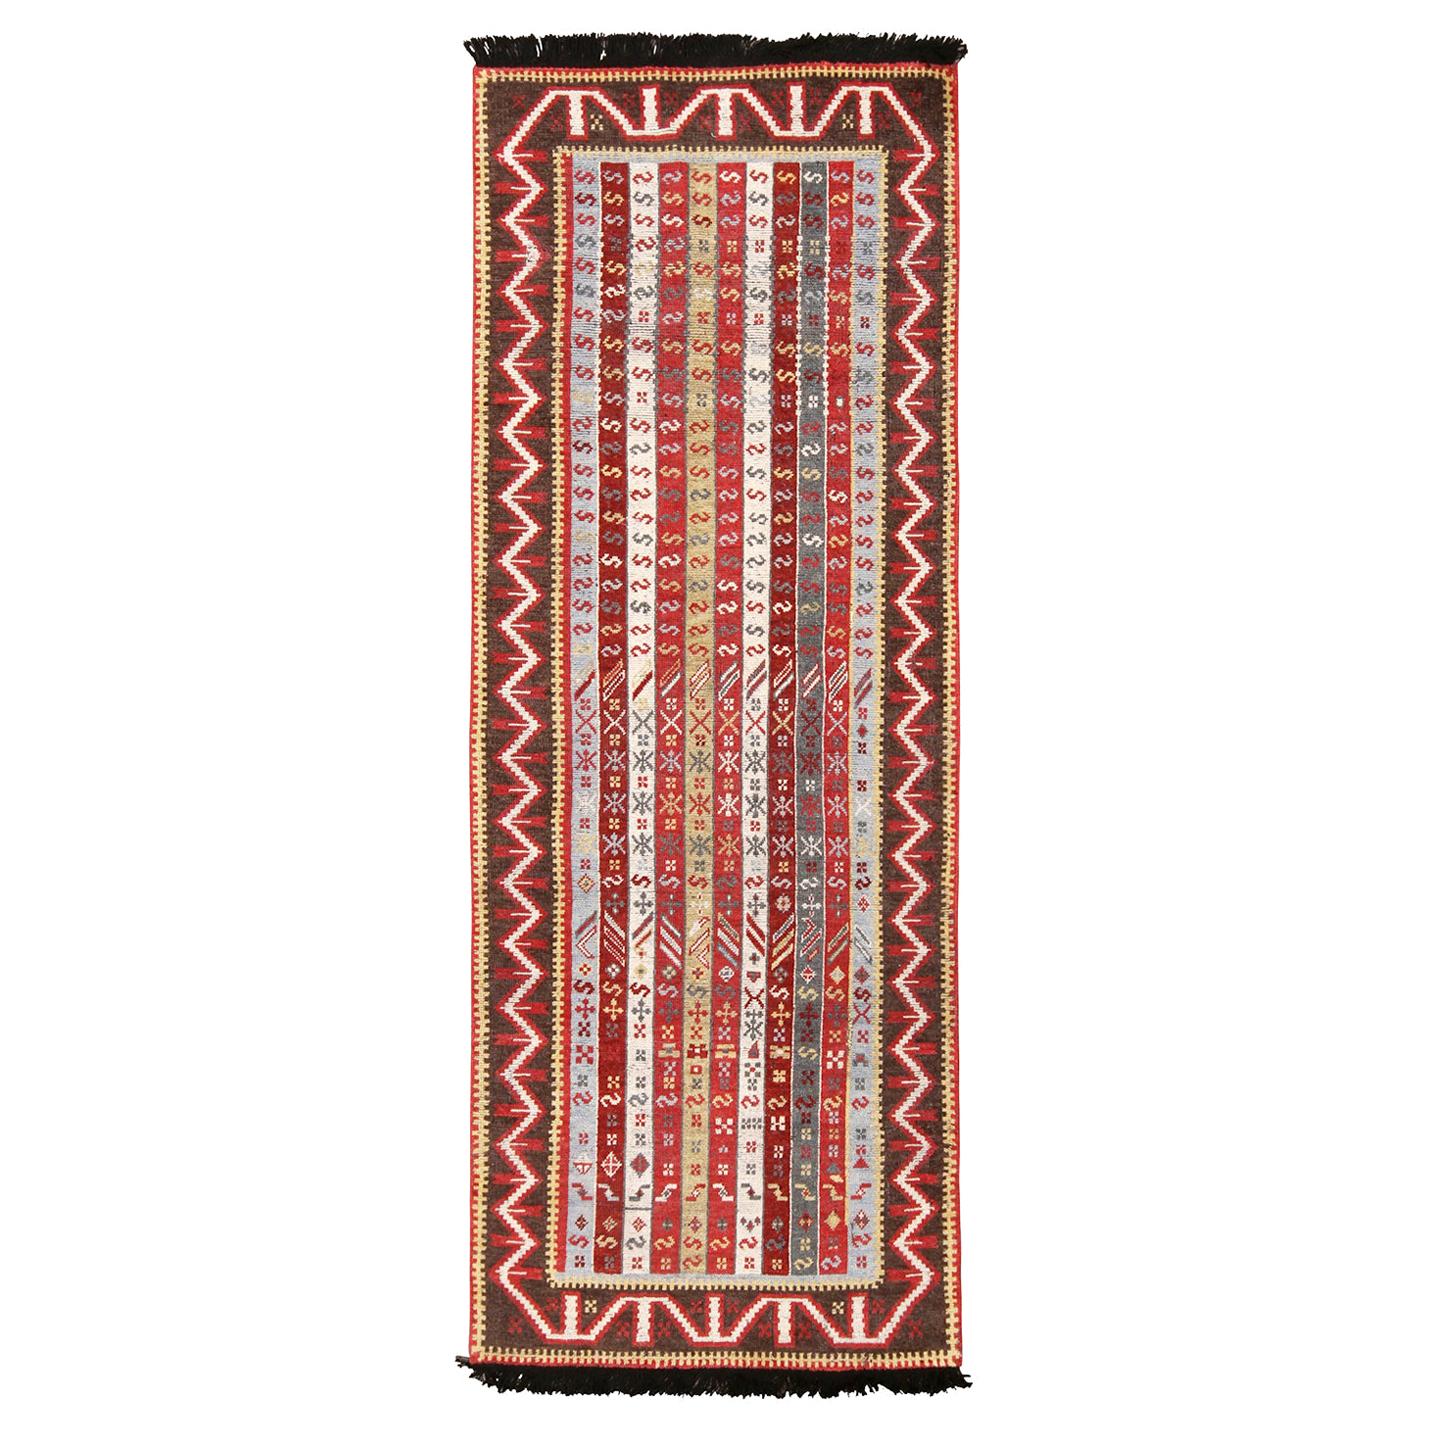 Burano Burgundy Red and Blue Wool Runner Rug with Antique Hook Motifs